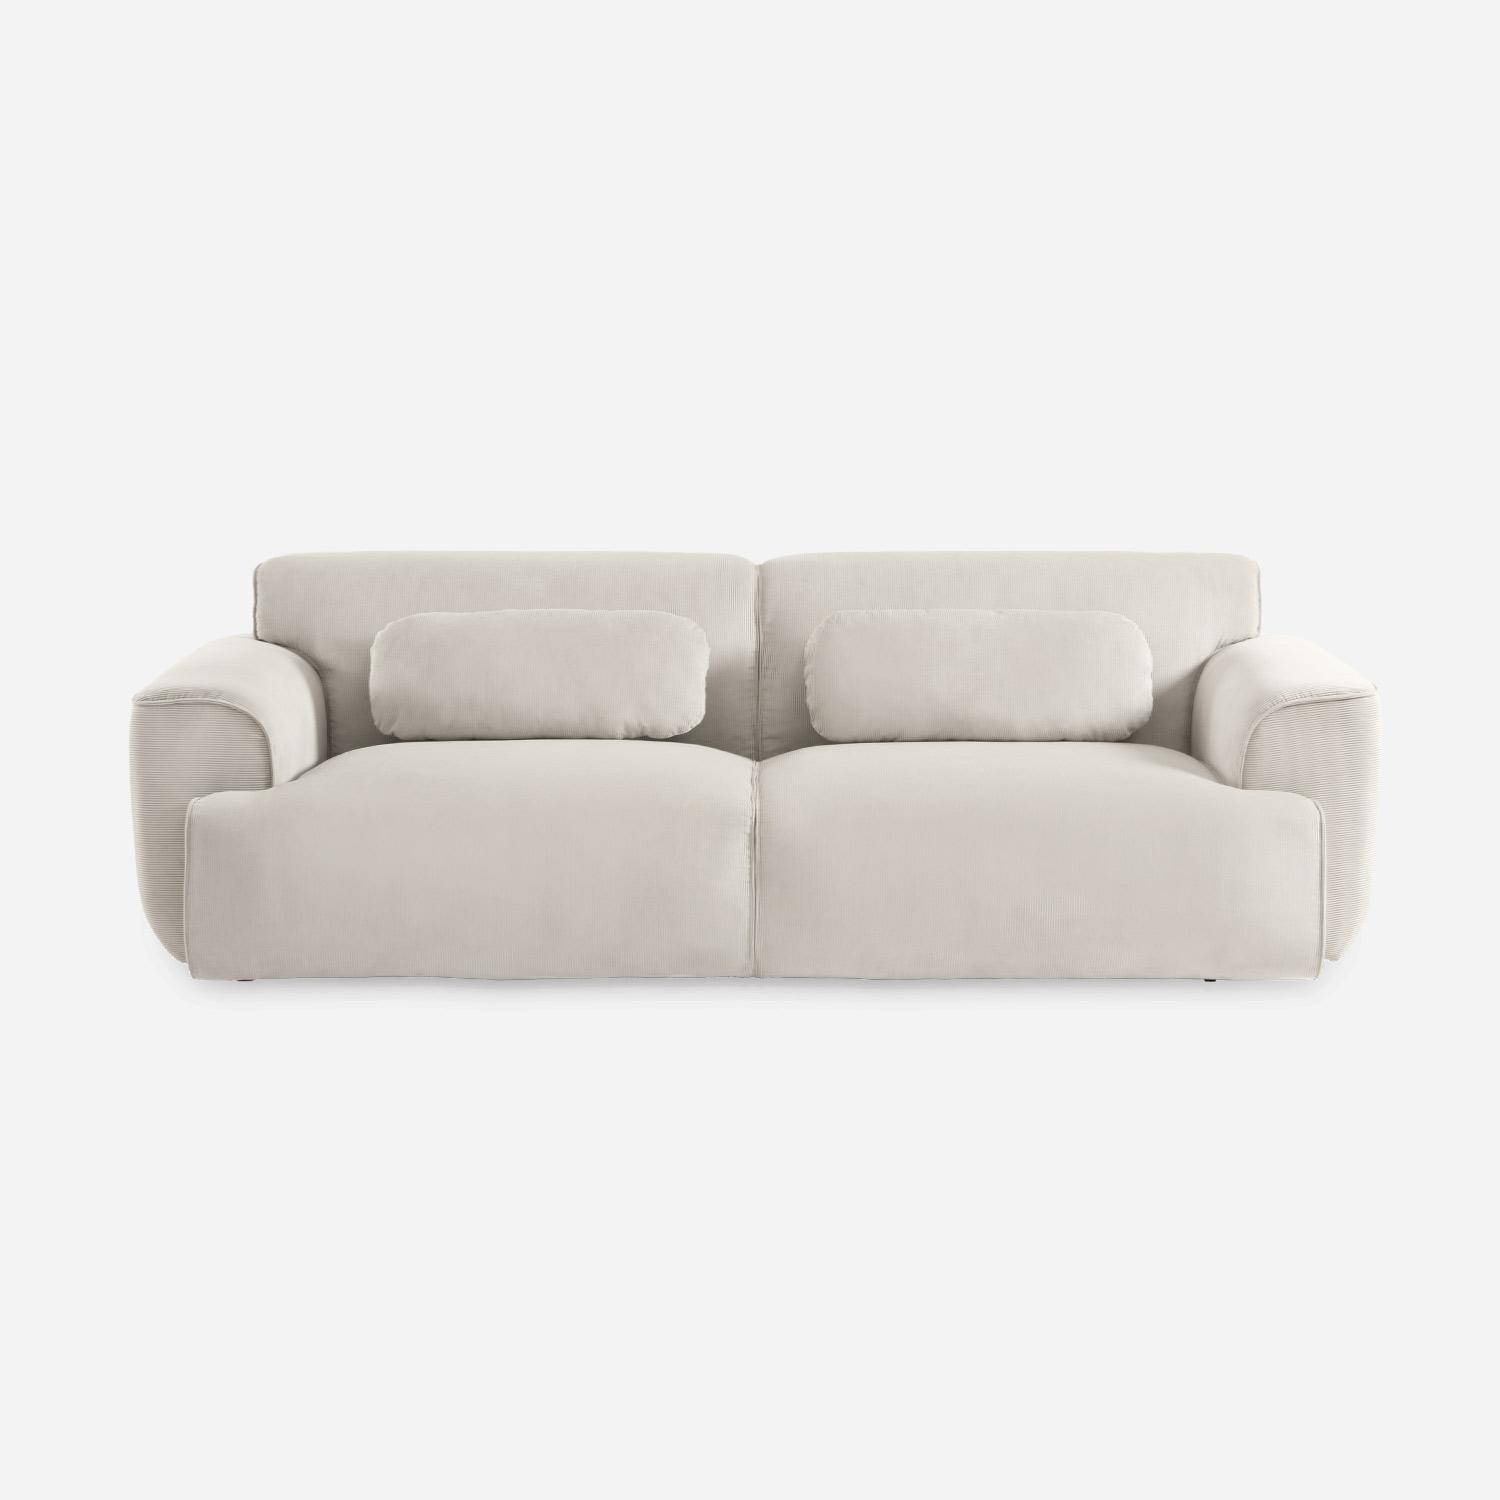  3-Seater corduroy velvet Sofa 230cm, deep seat, cushions provided and removable, beige Photo6